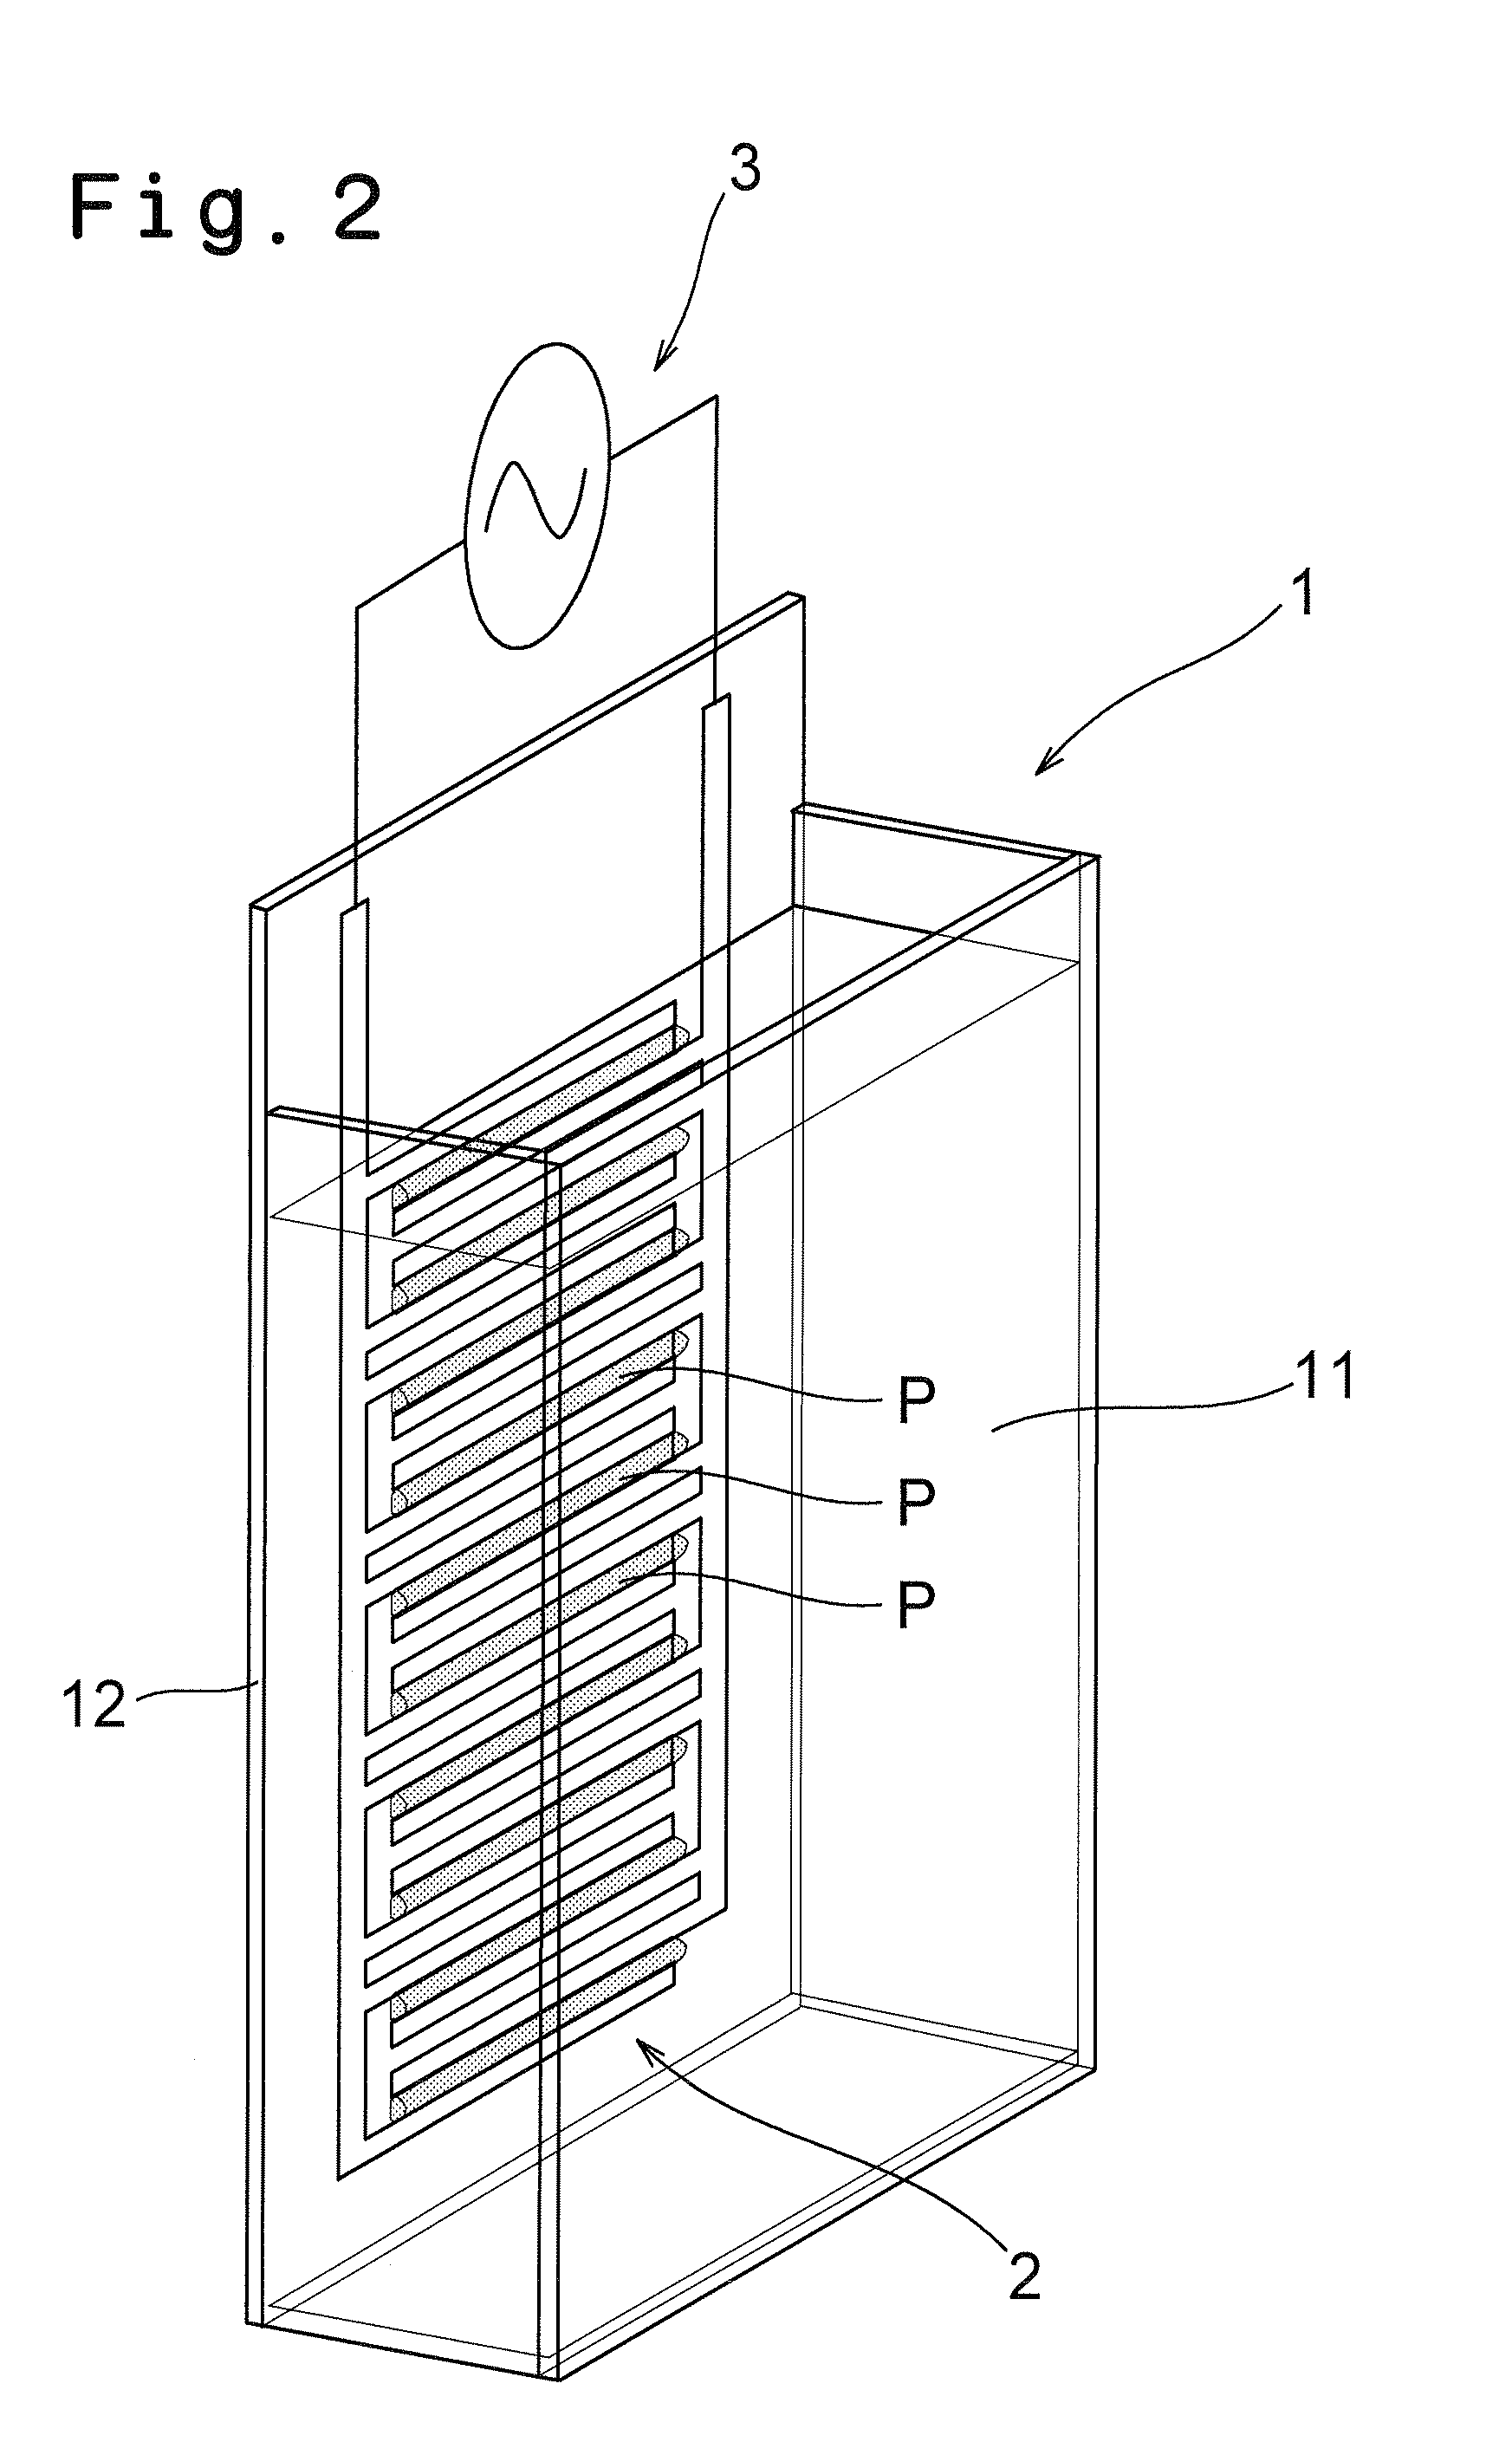 Method and apparatus for evaluating dielectrophoretic intensity of microparticle